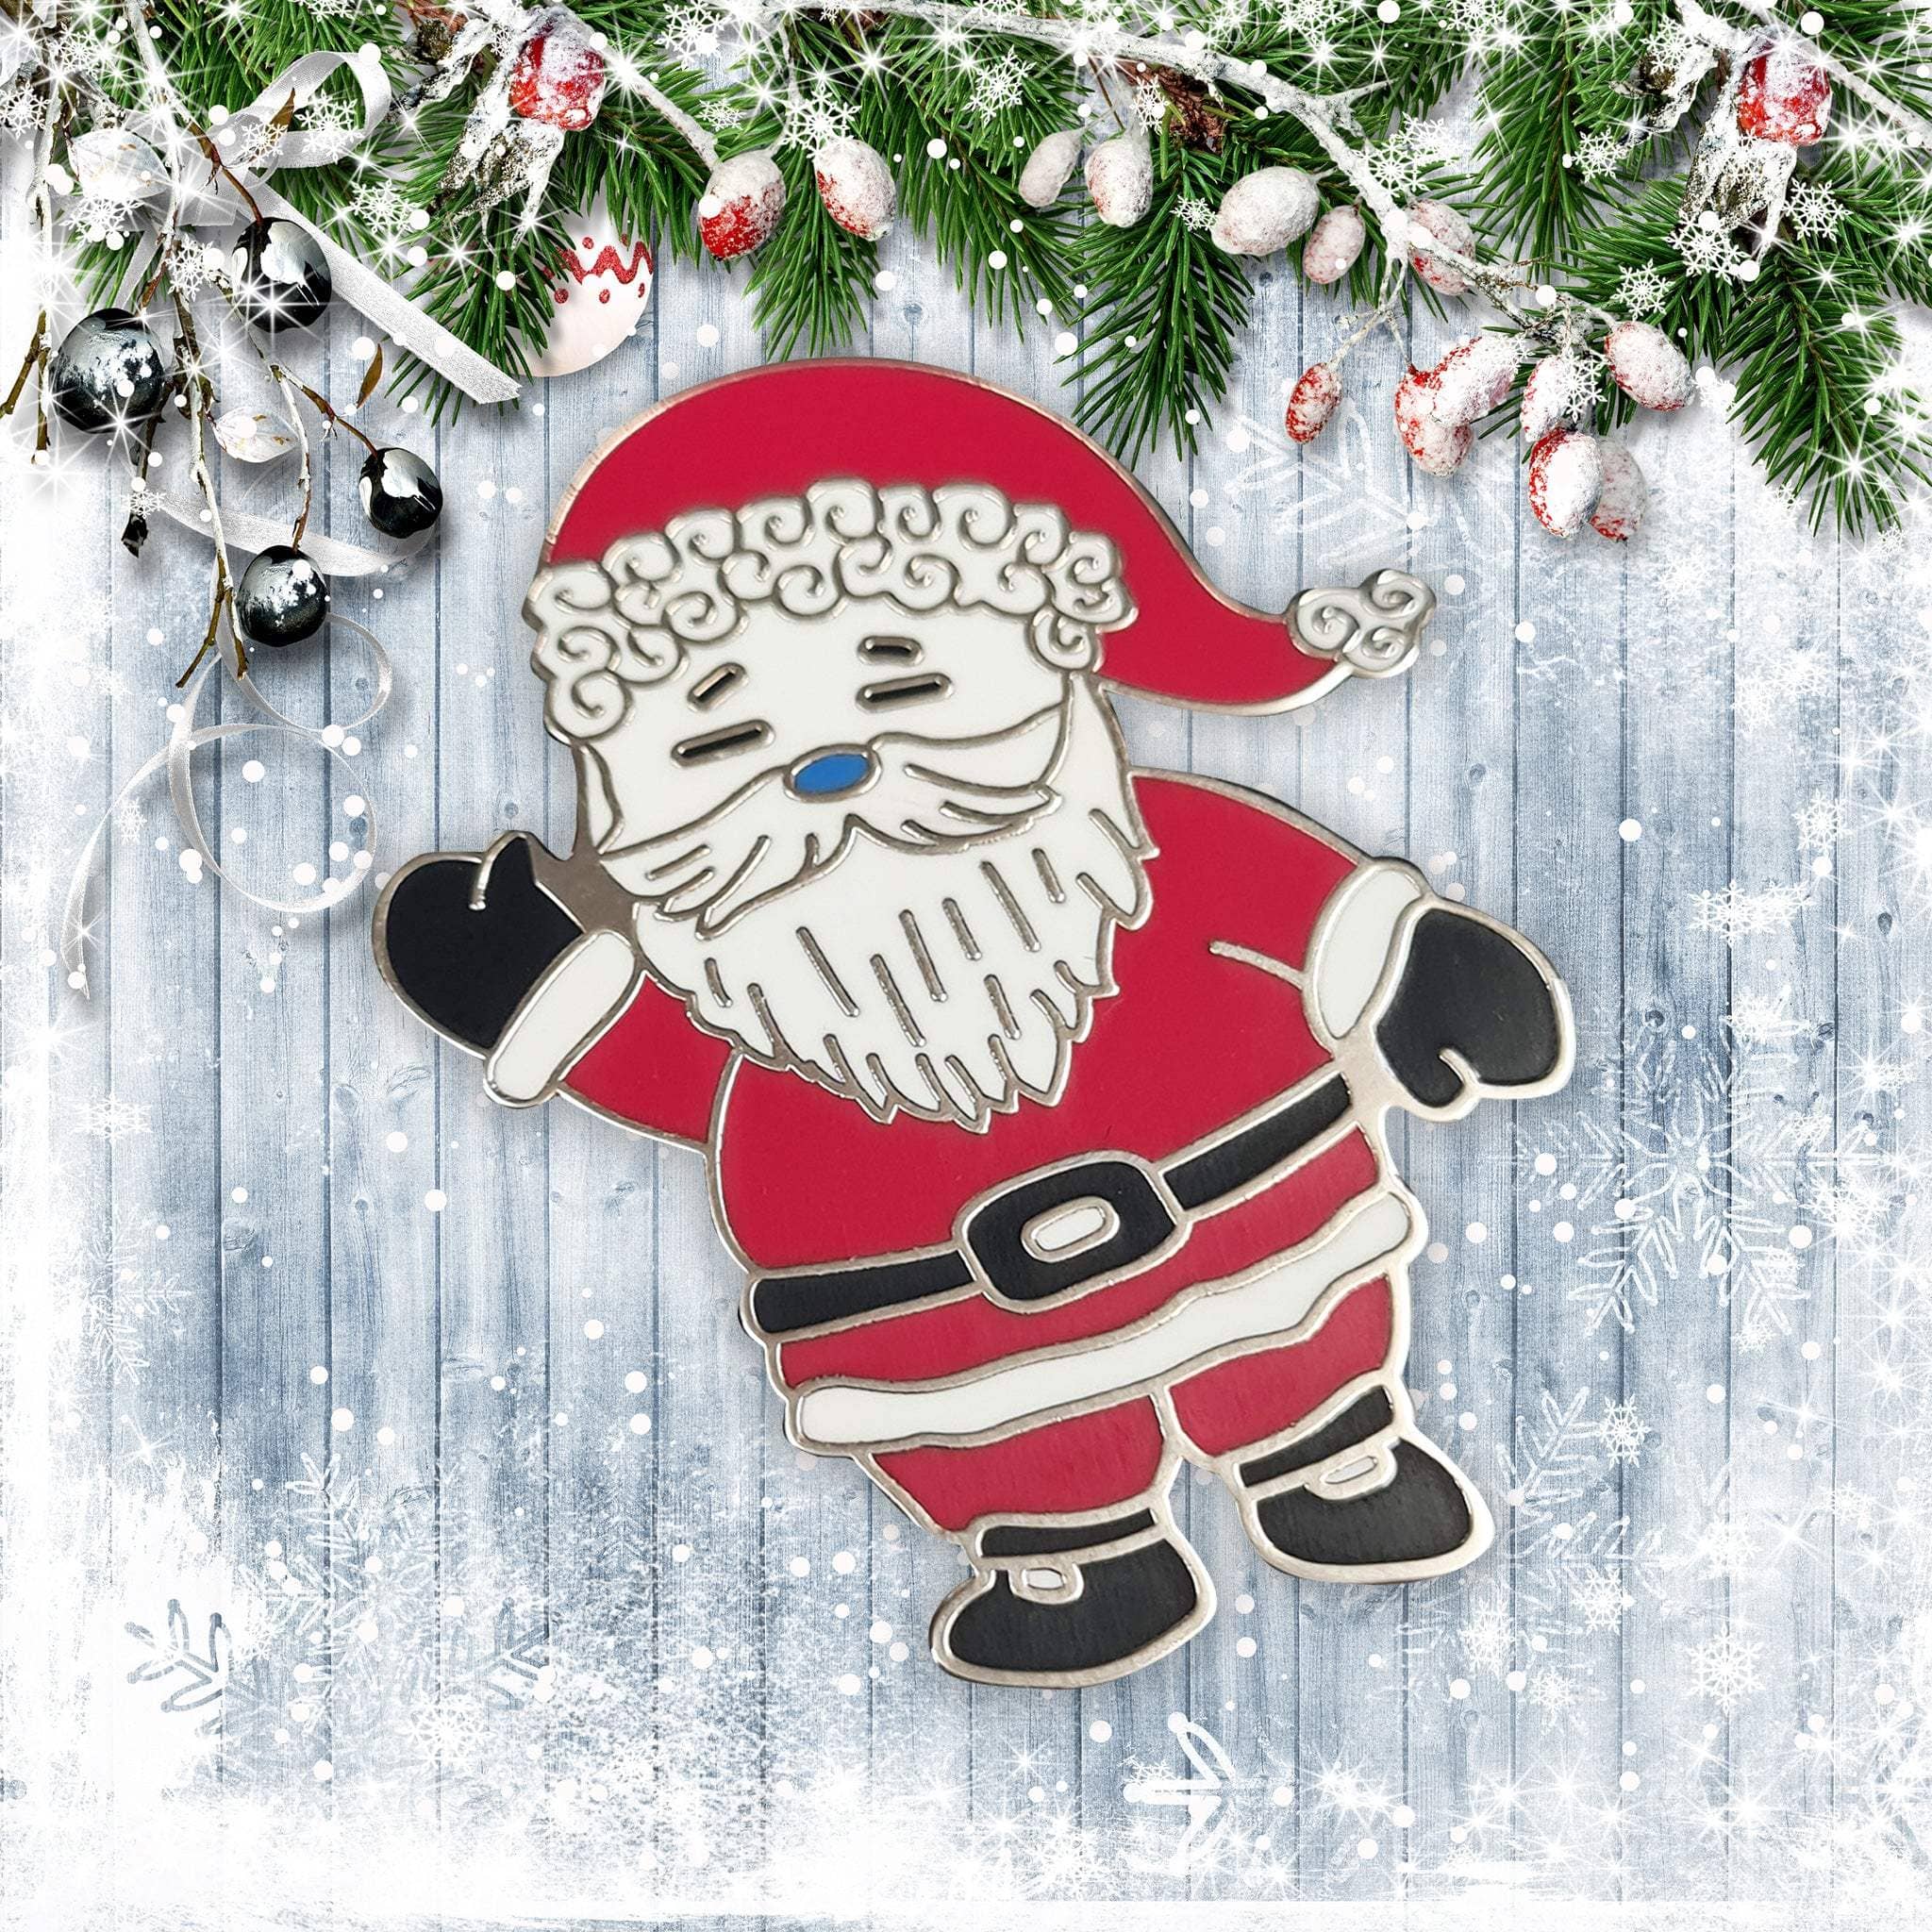 Beautiful Hard Enamel Needle Minder: Father Christmas , Embroidery Supplies , StitchDoodles , christmas, Christmas Embroidery, christmas needle minder, embroidery hoop kit, Embroidery Kit, embroidery kit for adults, embroidery kit fro beginners, modern embroidery kits, needleminder , StitchDoodles , shop.stitchdoodles.com